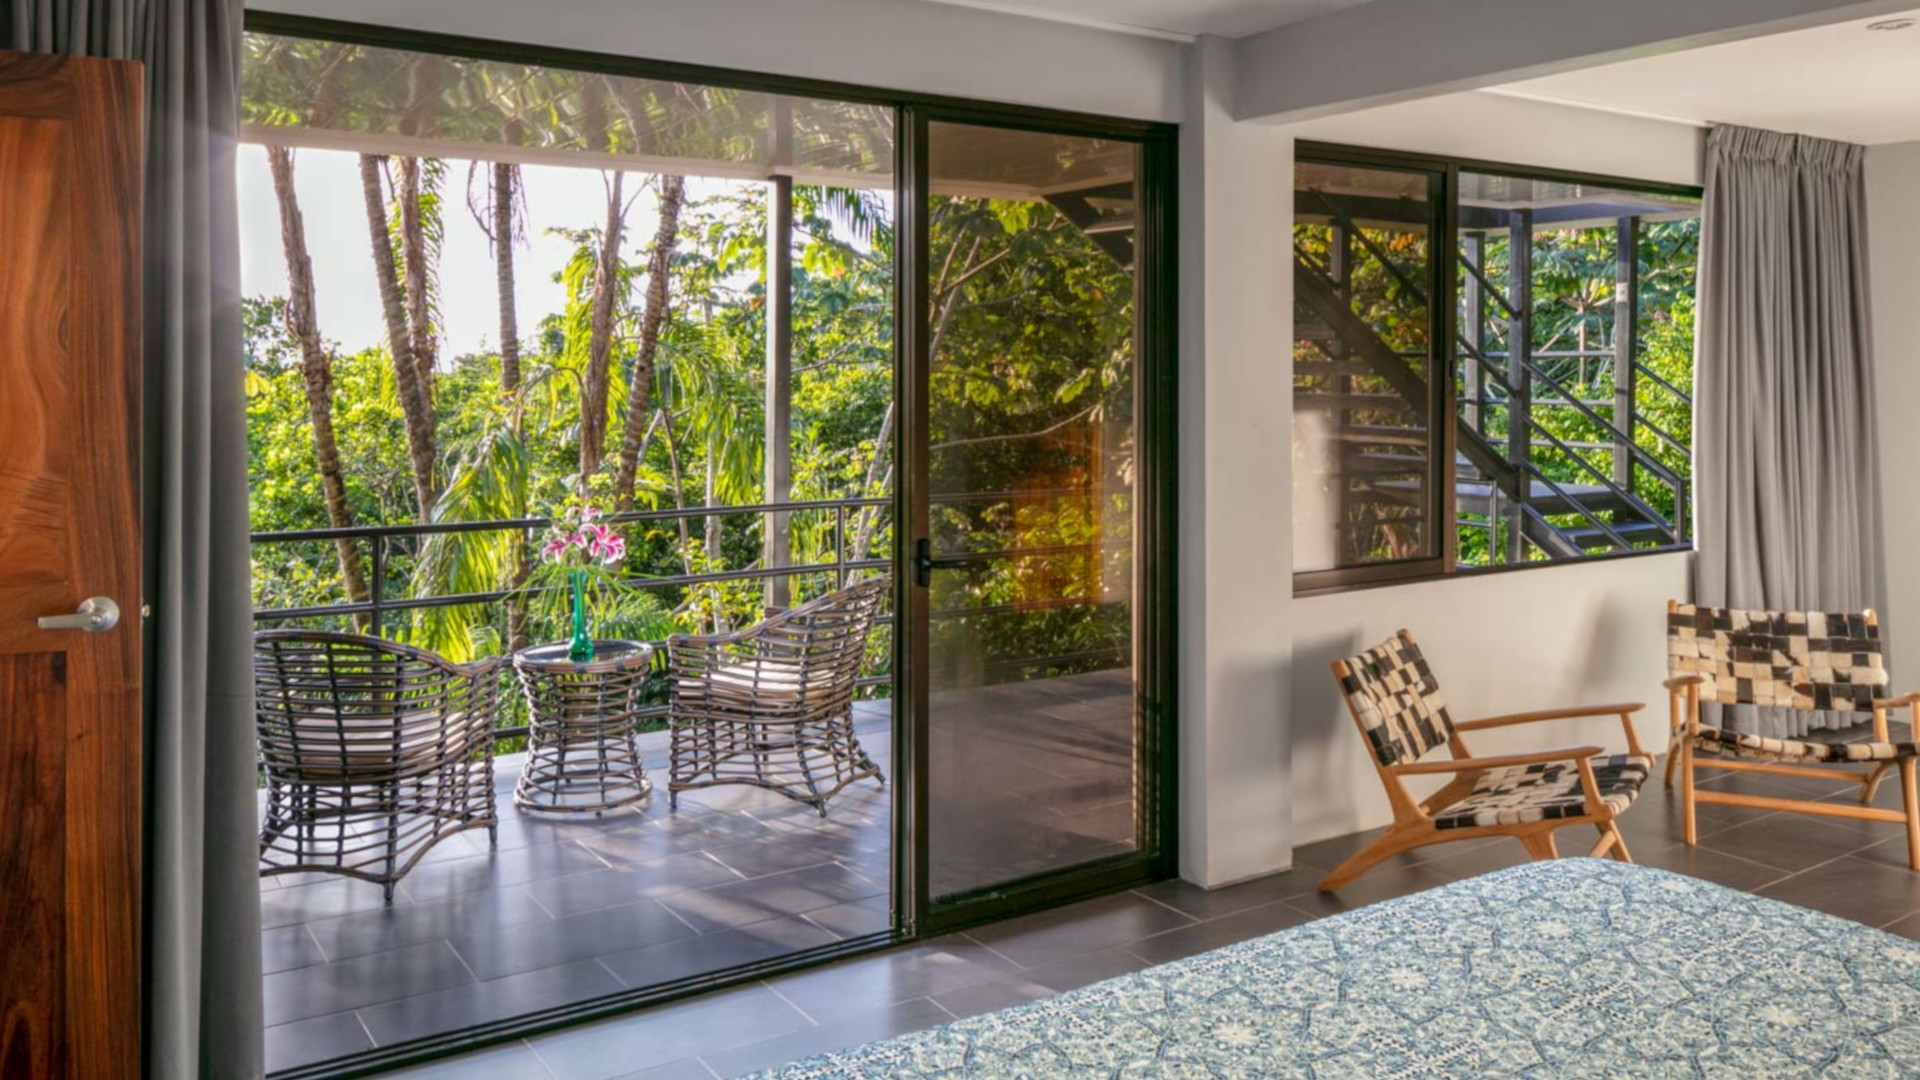 The tropical rain forest of Manuel Antonio is literally right outside your bedroom and this luxurious villa rental.